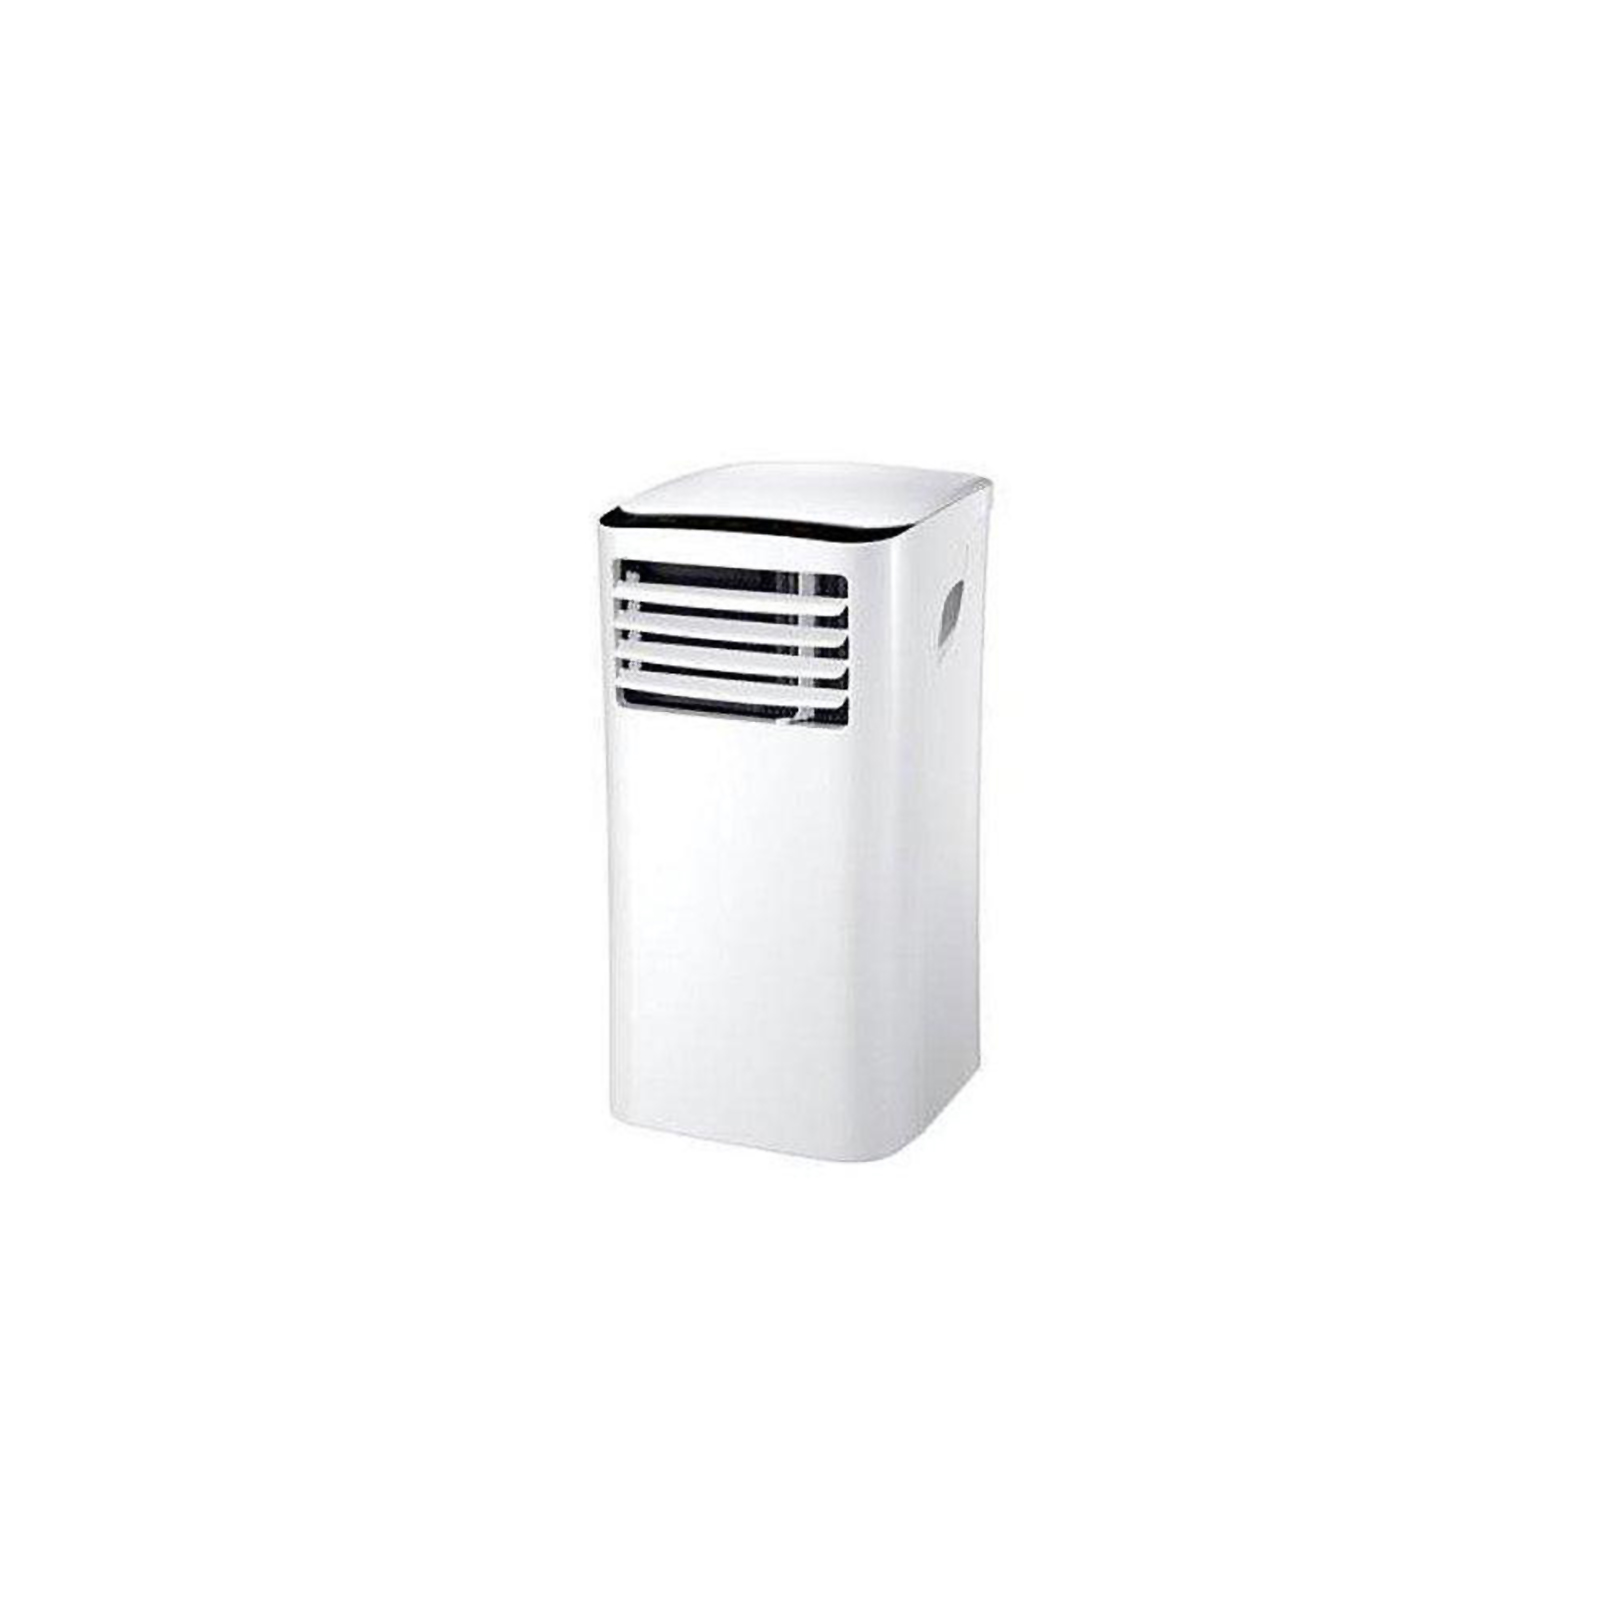 Comfort-aire PS81B  8000BTU Portable Room Air Conditioner with Remote